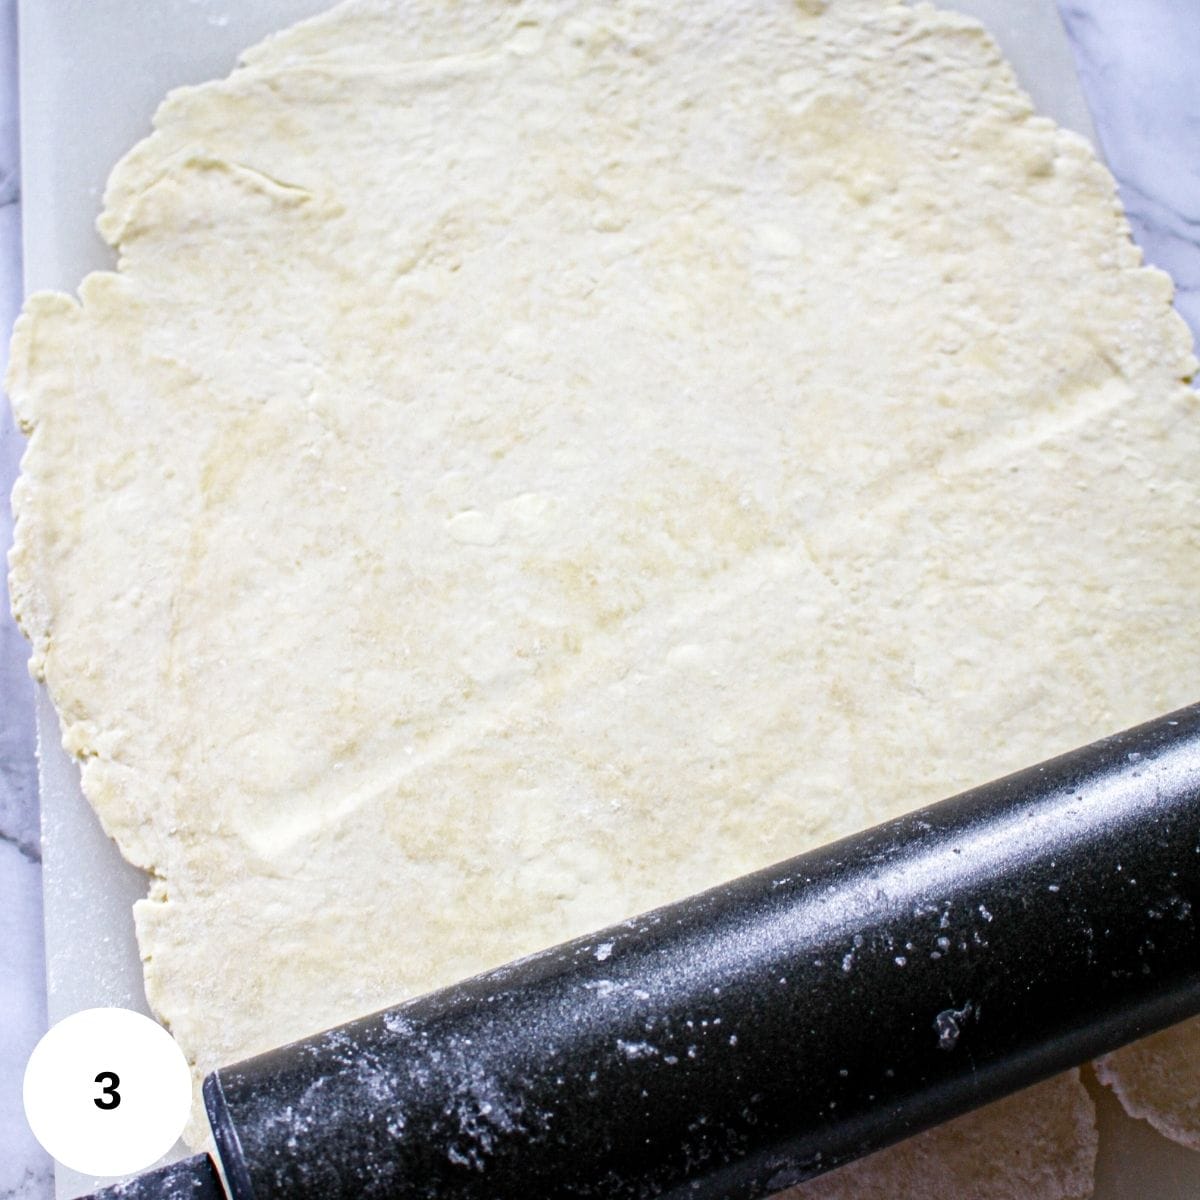 rolling the dough out to fit the pan.